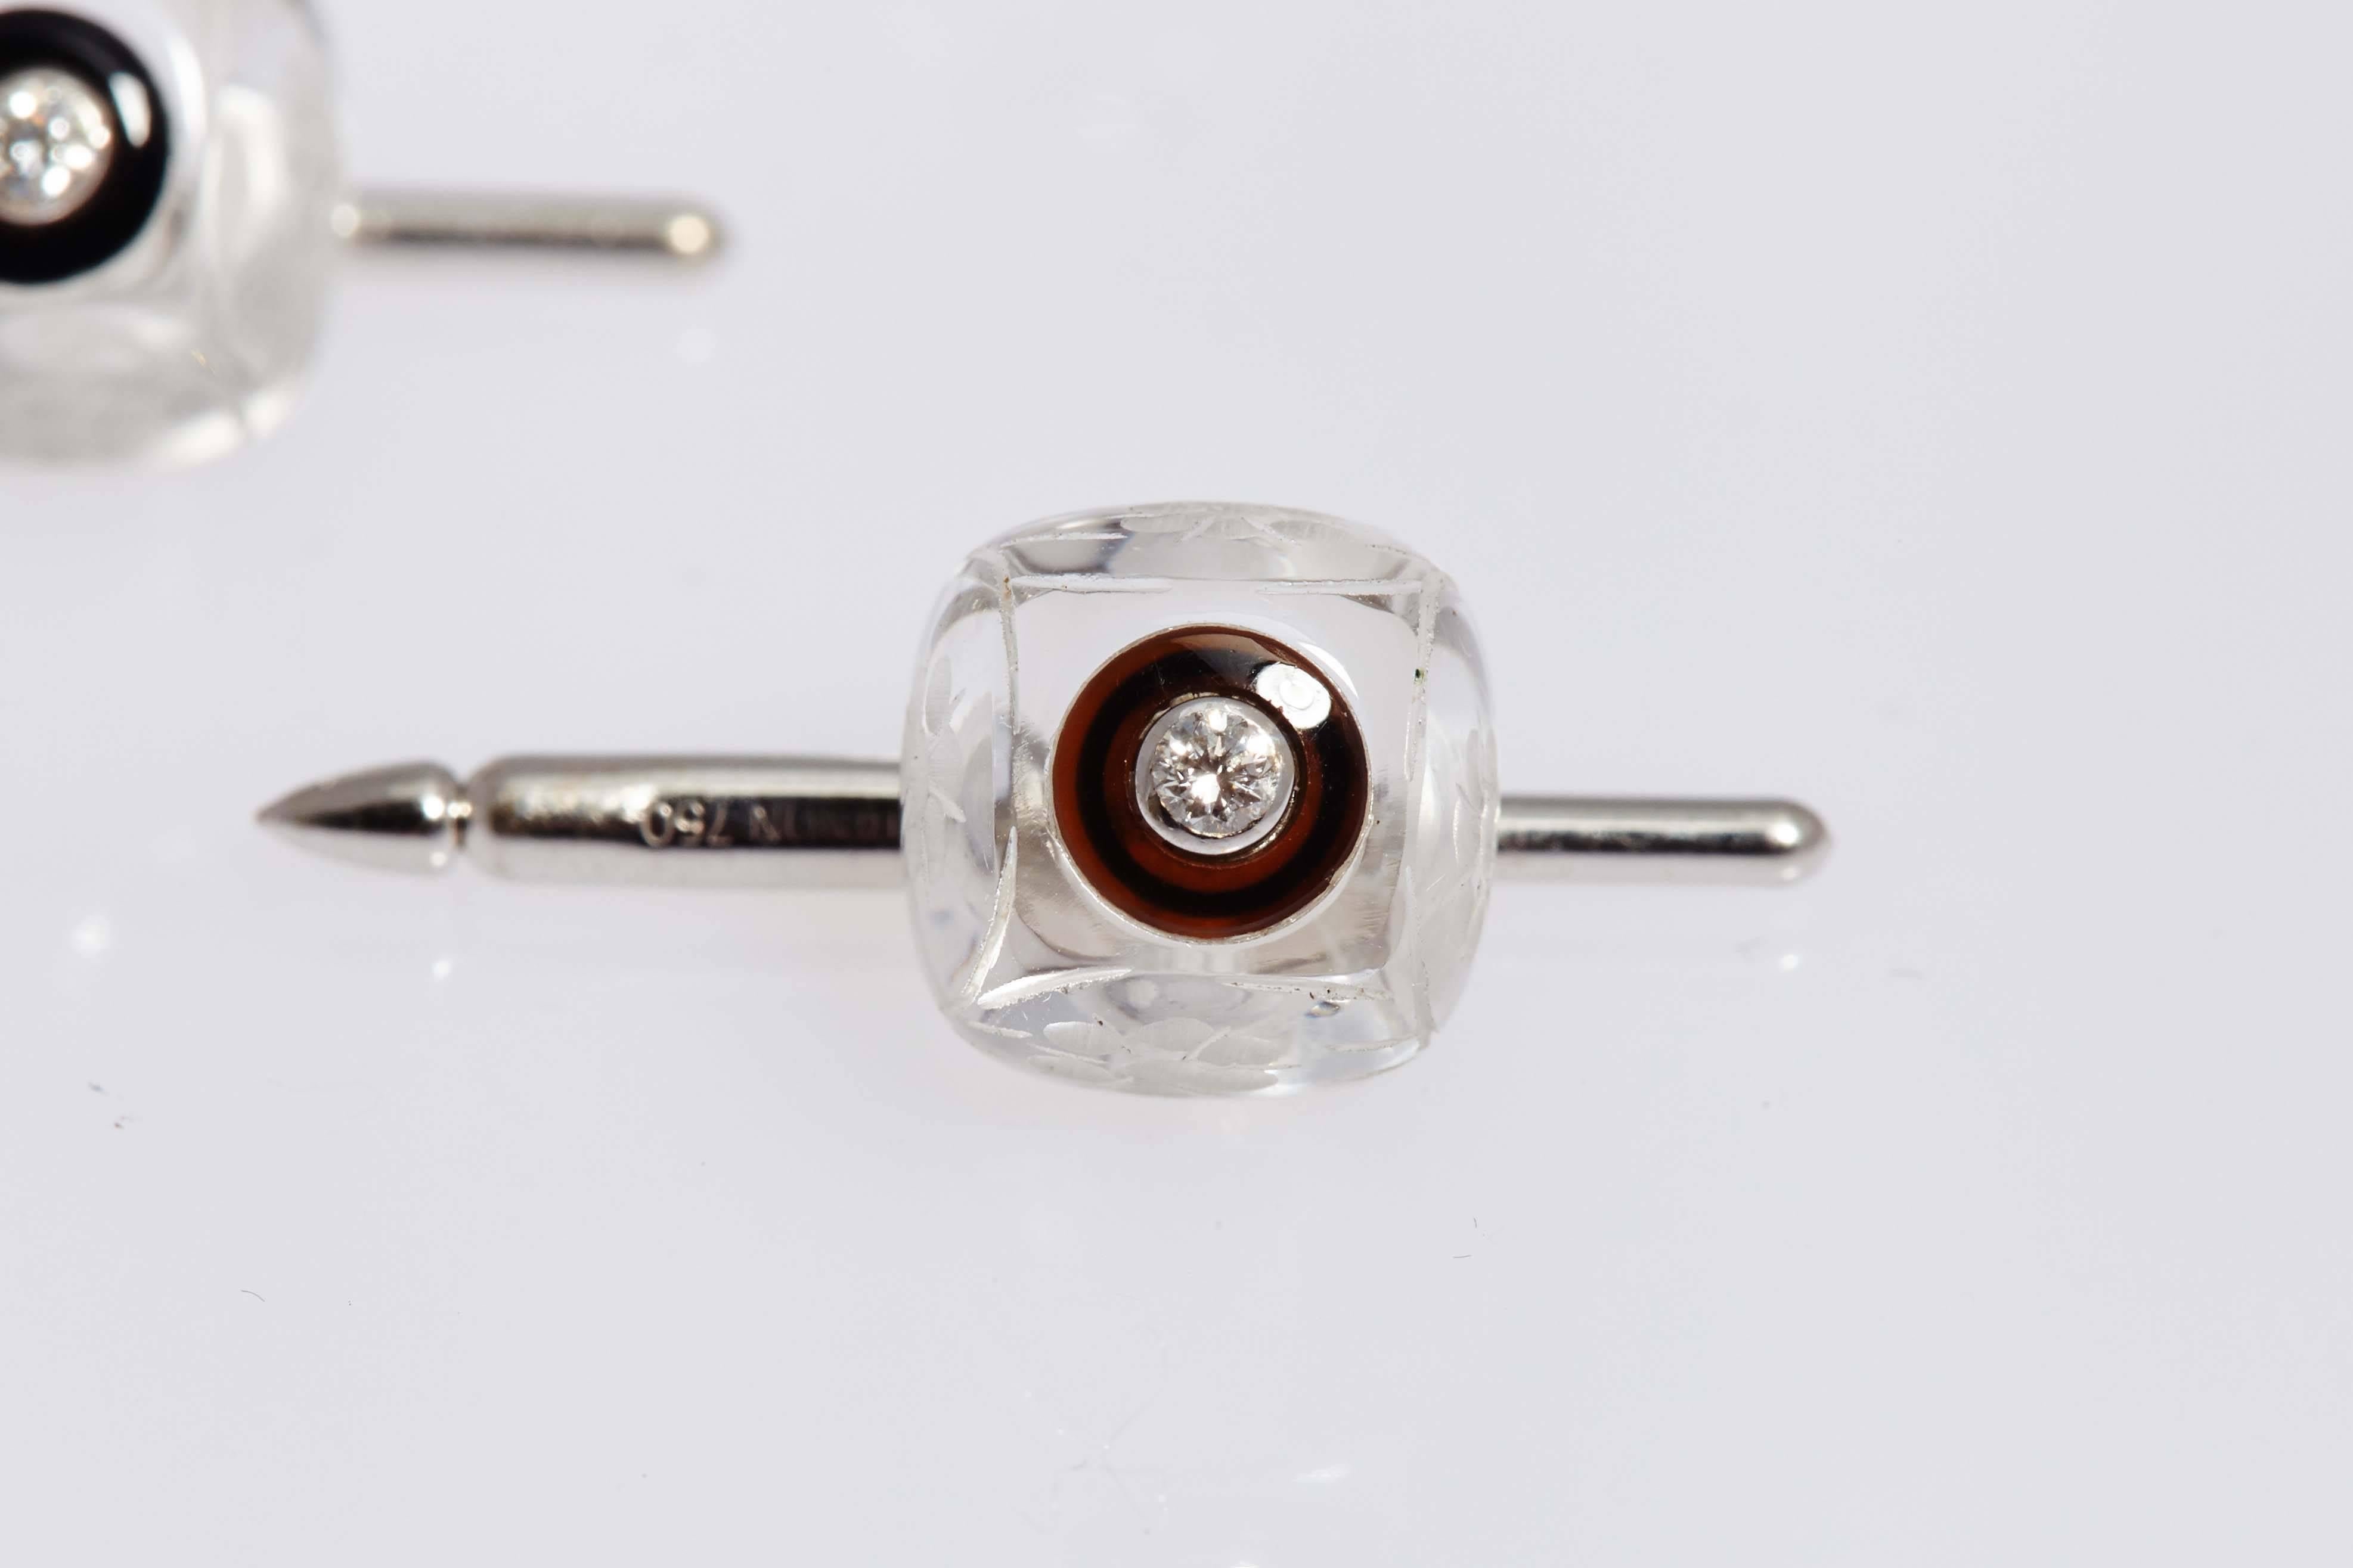 A set of elegant cufflinks and shirt studs in rock crystal, onyx and diamonds. Mounted on 18kt white gold. Circa 1980 